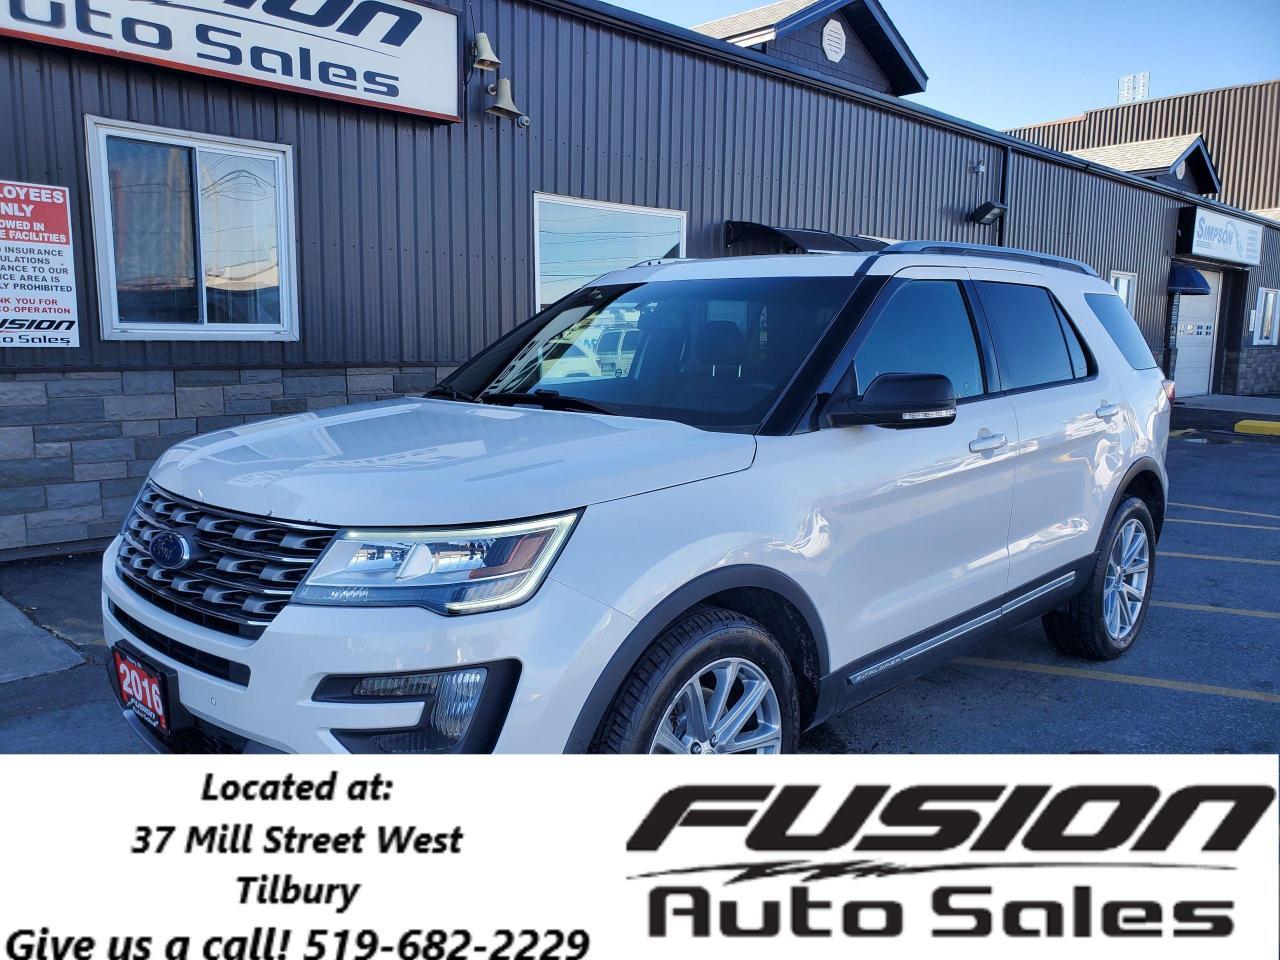 2016 Ford Explorer 4WD XLT-NO HST TO A MAX OF $2000 LTD TIME ONLY